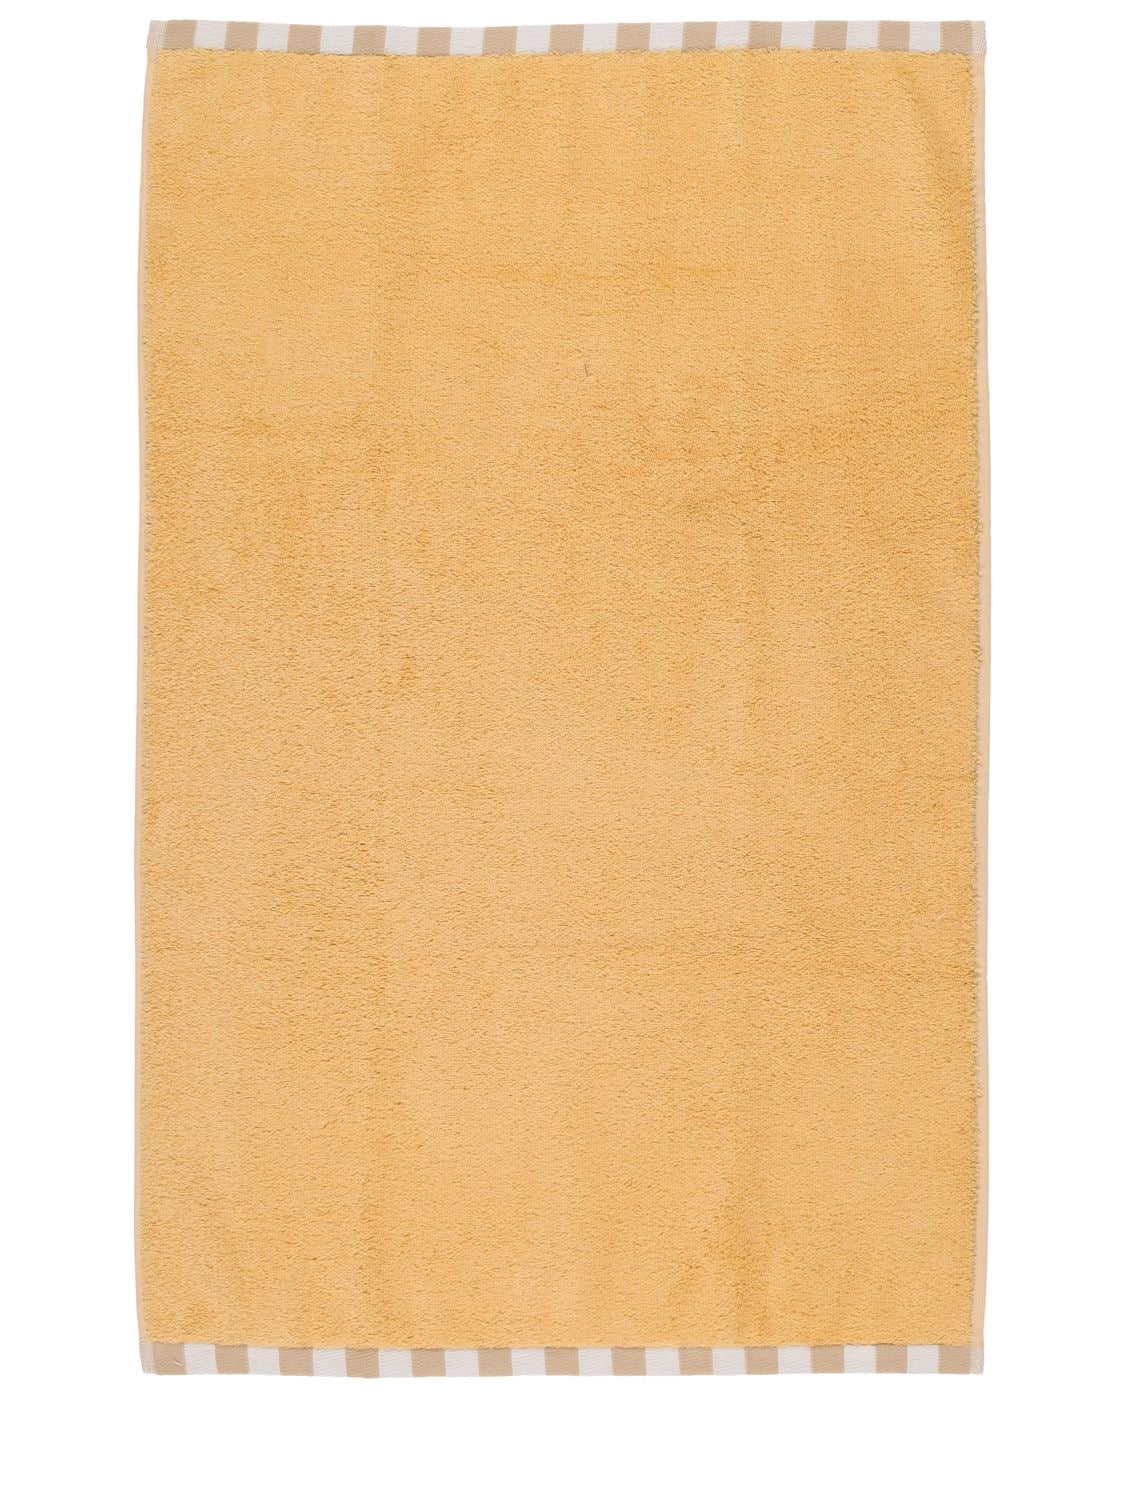 Image of Peach Royal Cotton Hand Towel